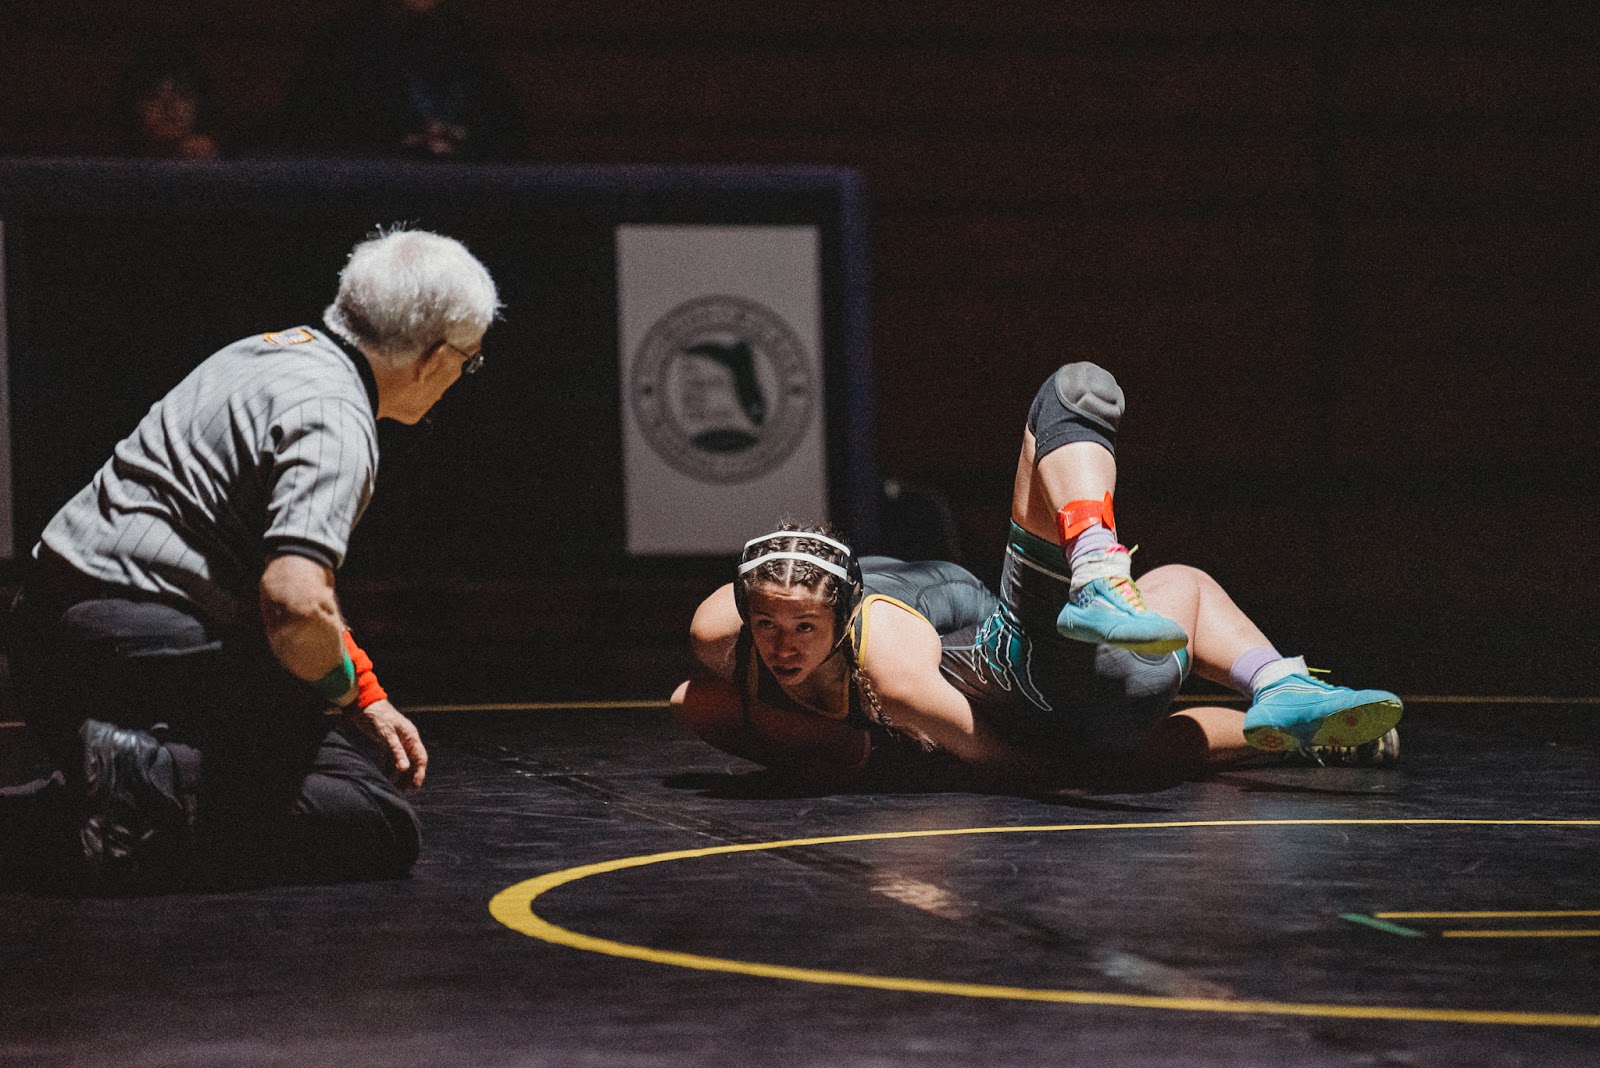 Nathalia Espinal looks for the signal of the pin.